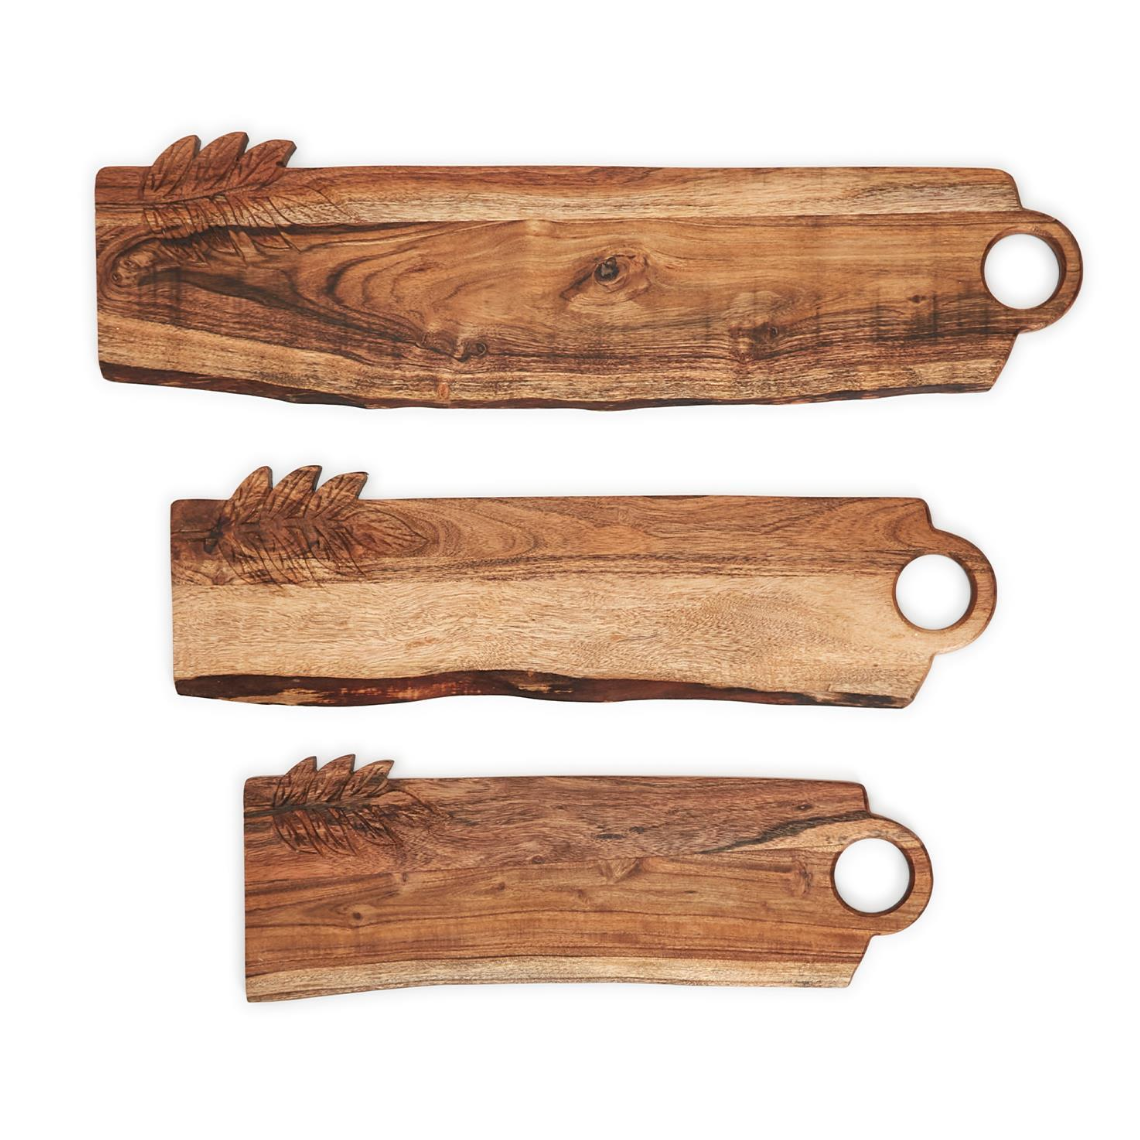 CRAFTED CHARCUTERIE SERVING BOARDS WITH LEAF DESIGN-Small